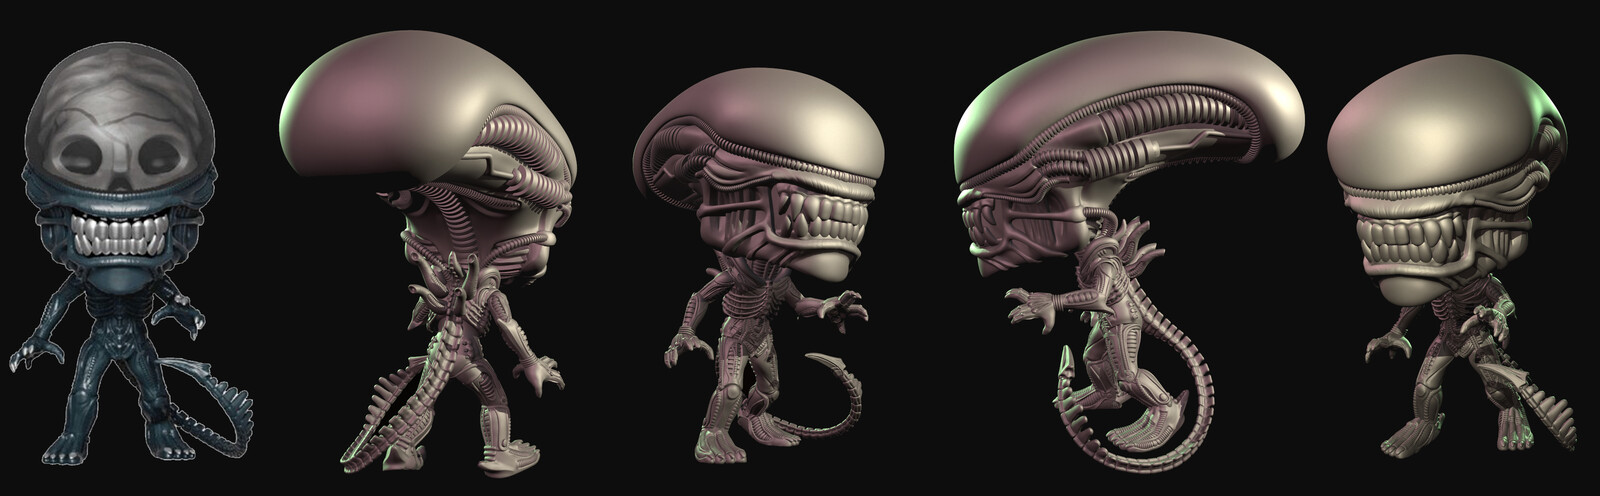 The Xenomorph! Was sooooo cool to work on these 40th anniversary pops. 